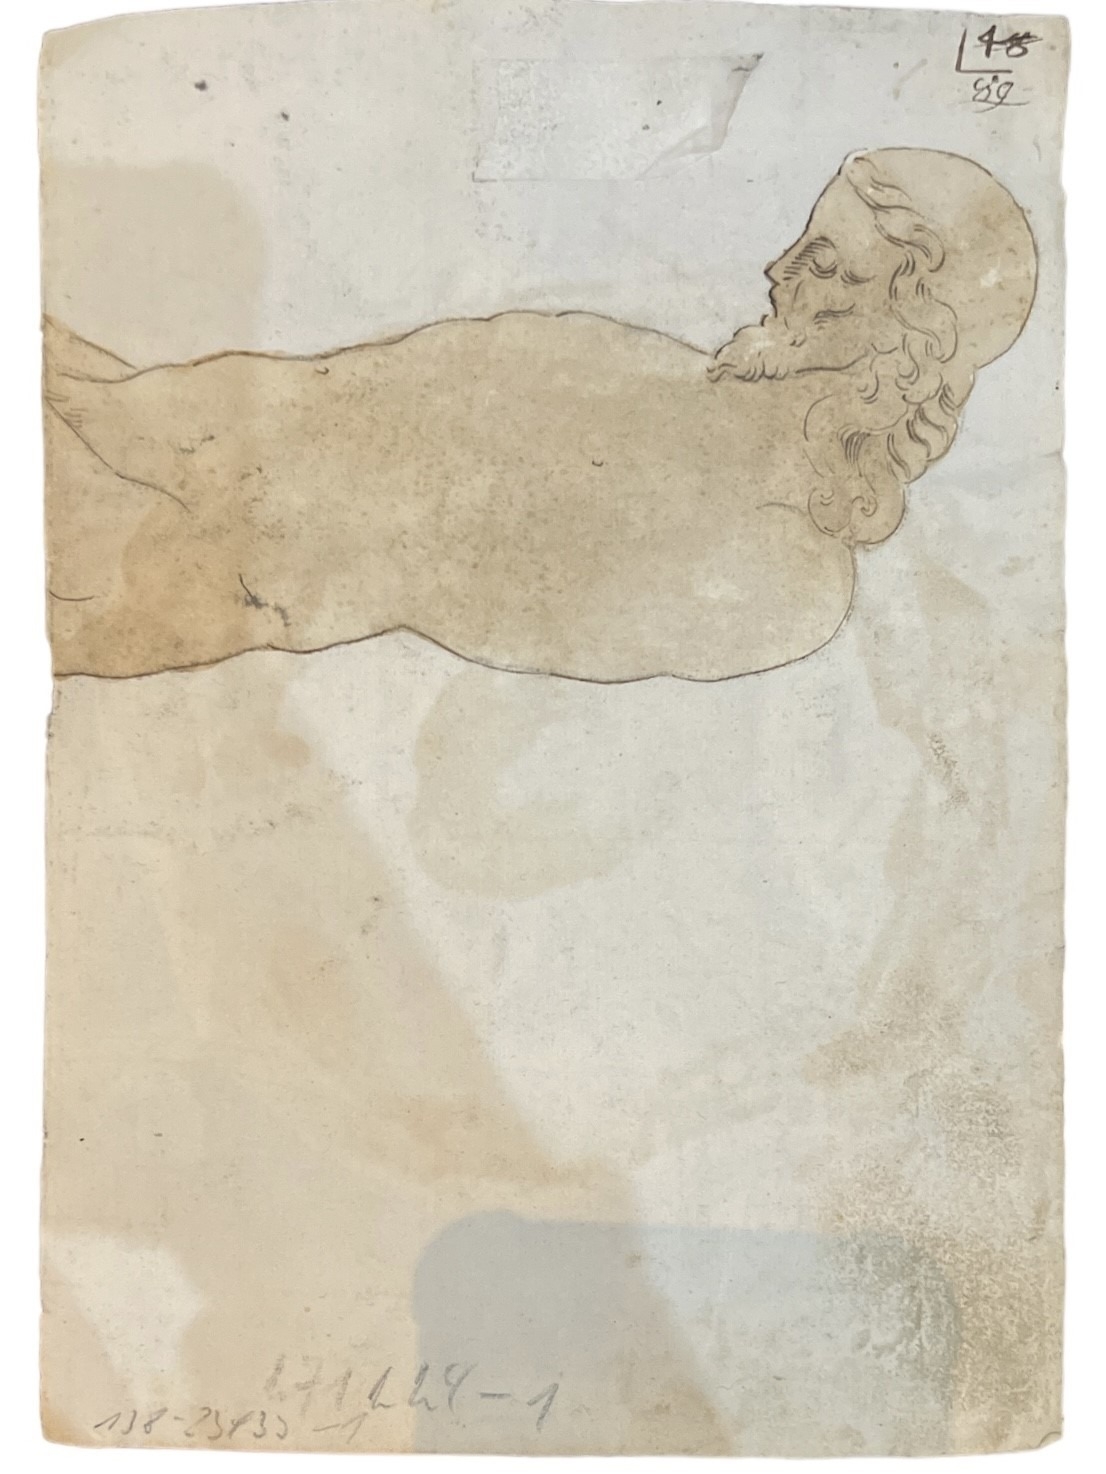 MANNER OF LUCA GIORDANO, NAPLES, 1634 - 1705, 17TH CENTURY ITALIAN PEN, INK AND WASH DRAWING - Image 3 of 3